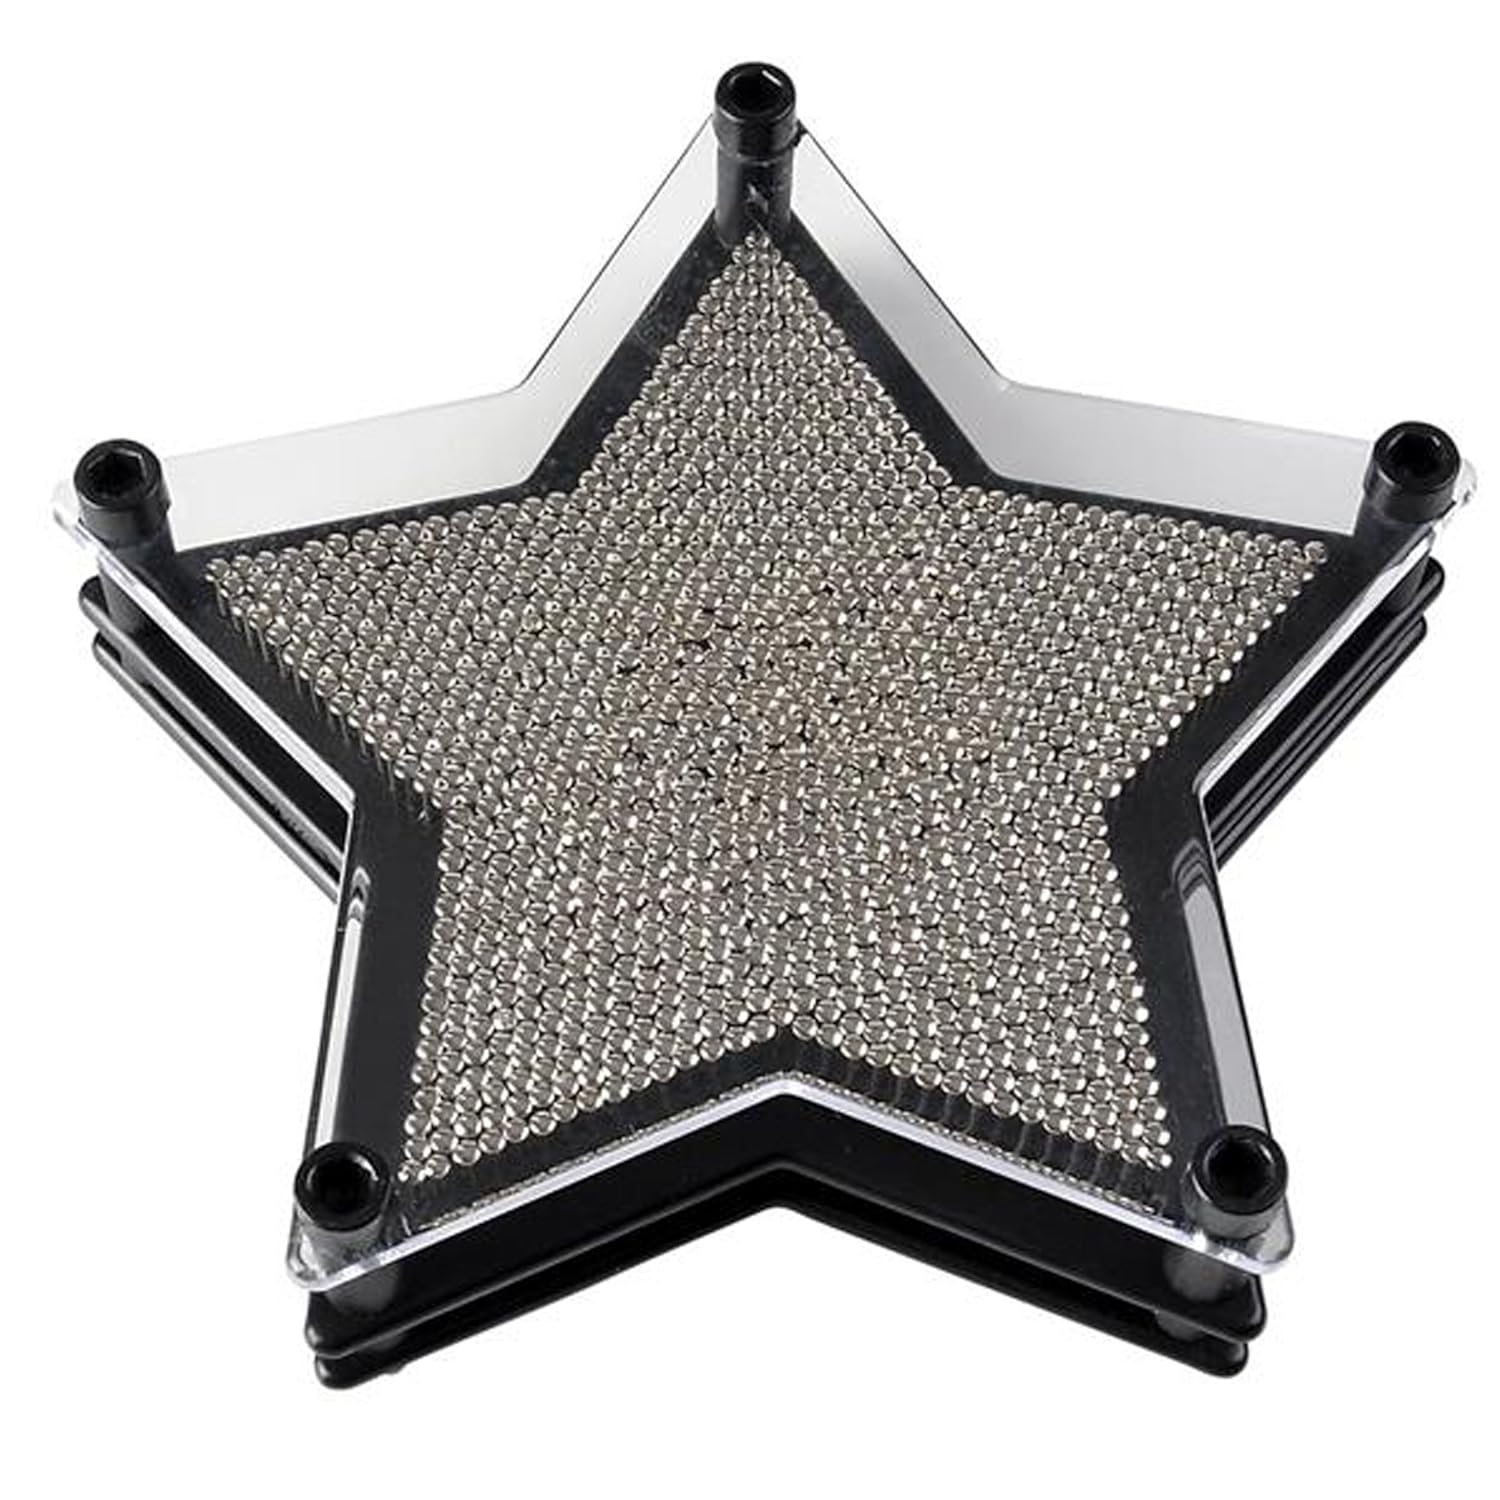 ArtCreativity 6 Inch Star Pin Art Game for Kids-Adults Pin Art Toy for Autistic Kids-Stainless Steel Metal Pins, Sturdy Plastic Frame-Great Party Favor, Gift for Boys-Girls, Office Desk Decoration